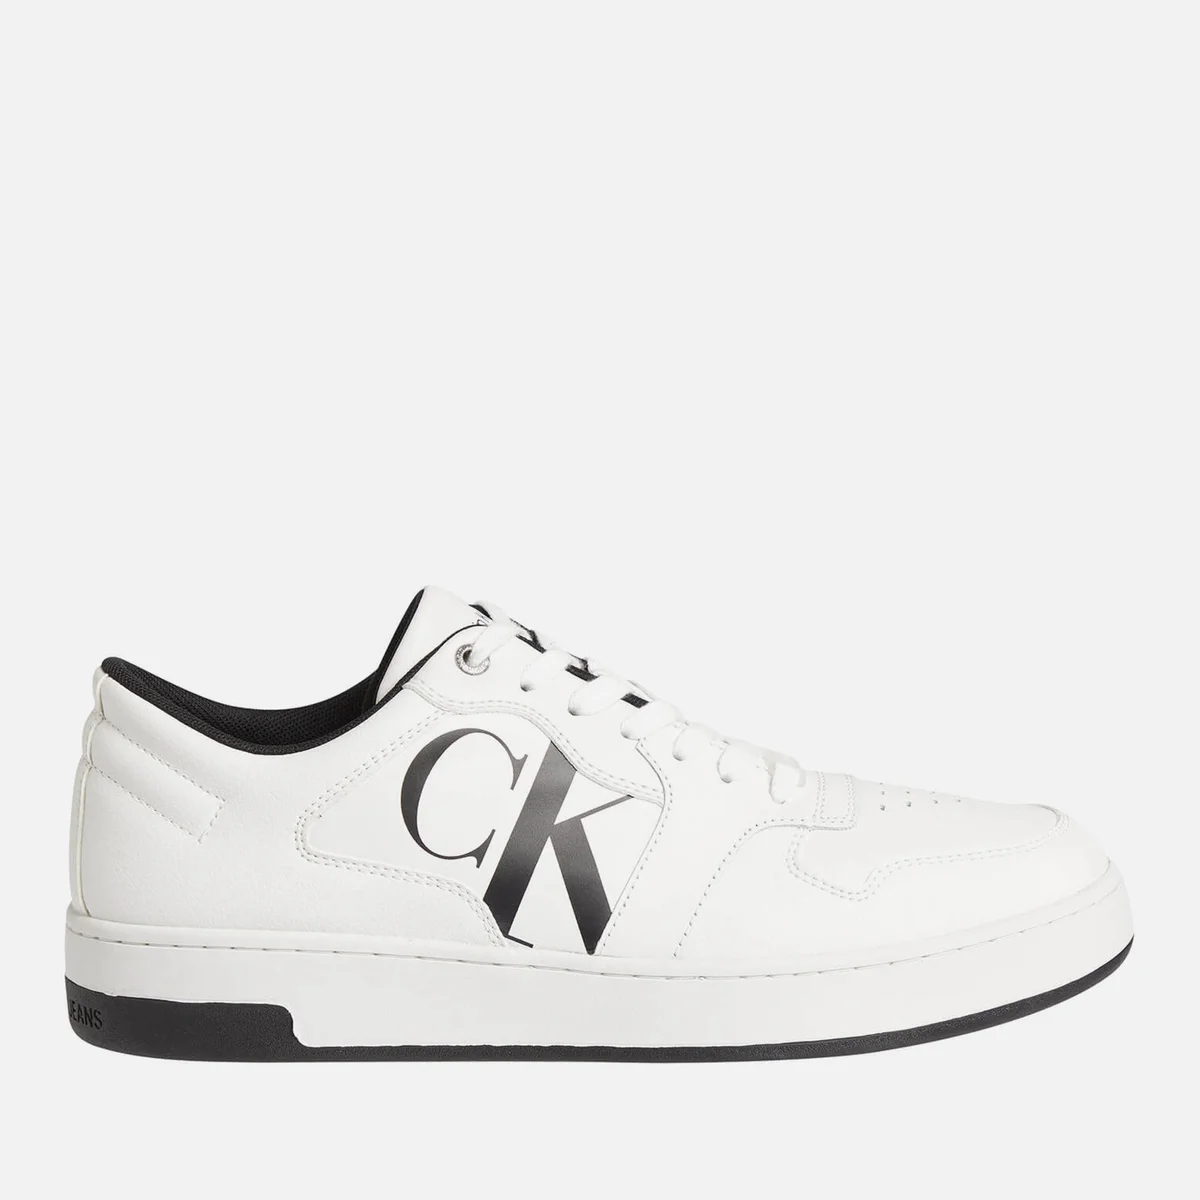 Calvin Klein Jeans Leather Basket Trainers Image 1